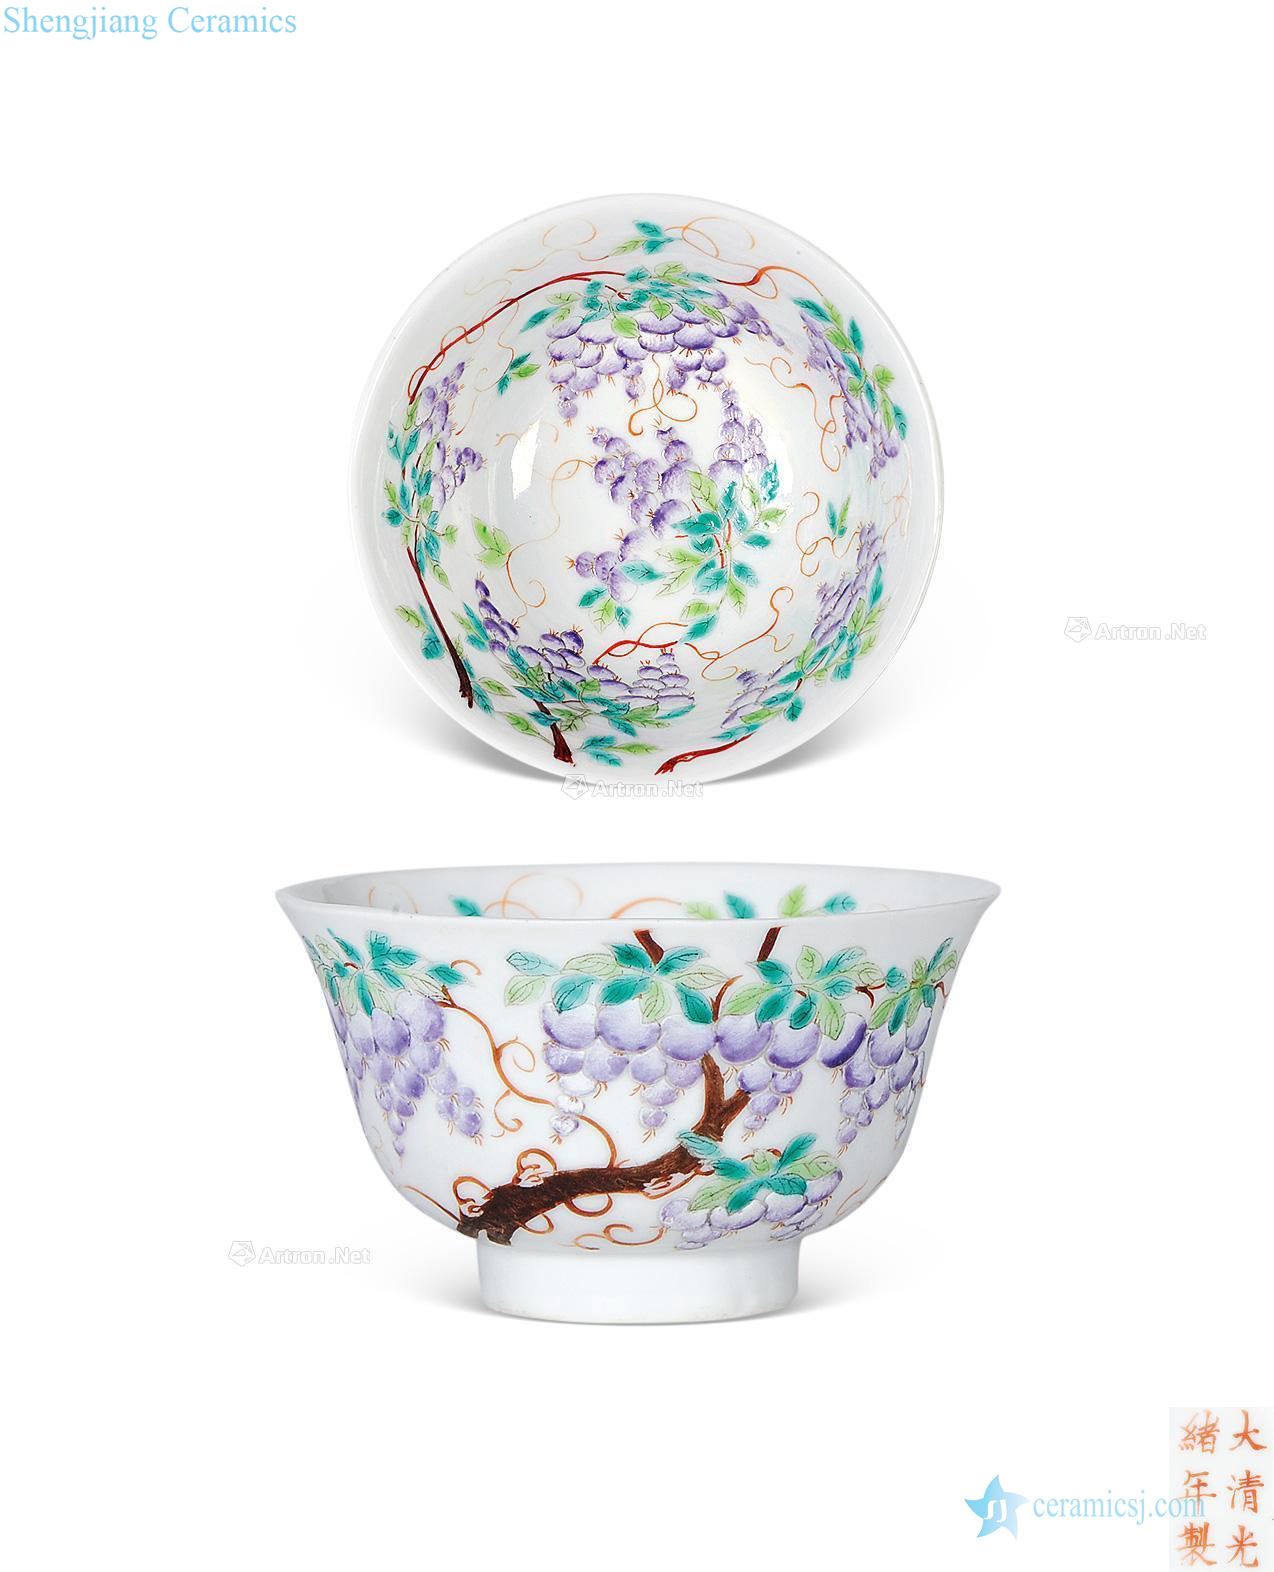 Pastel reign of qing emperor guangxu wisteria small bowl